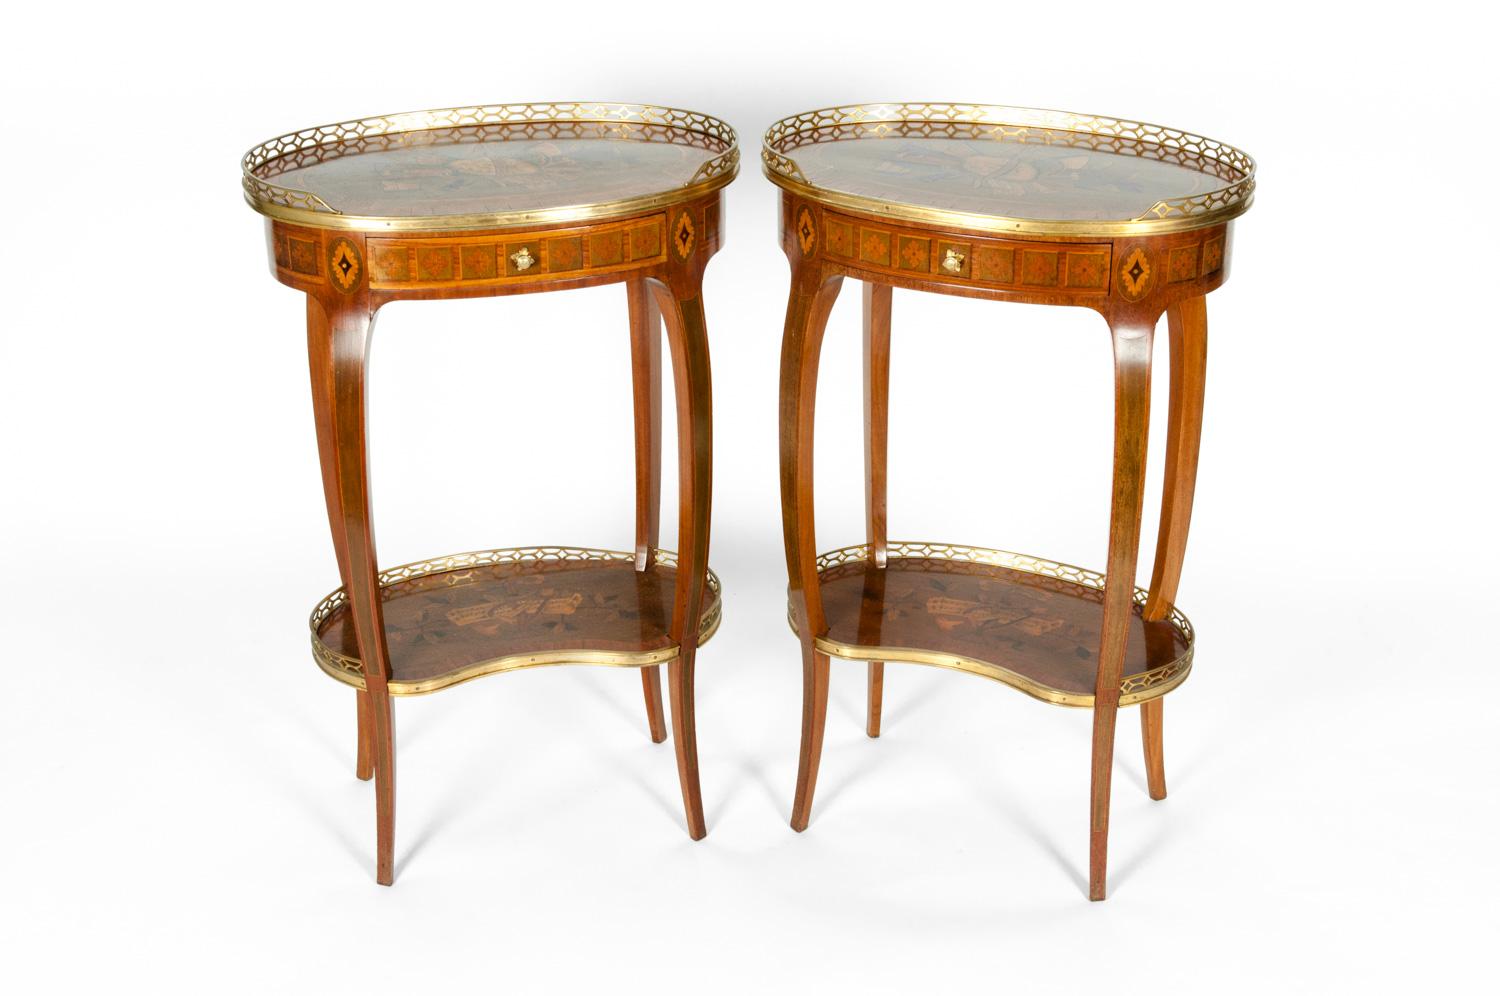 Antique French pair of Louis XV style mahogany Marquetery with gild bronze side / end tables. Each table is in excellent condition
and undersigned by the maker. Each one measure 28 inches high X 18 inches width X 12 inches deep.